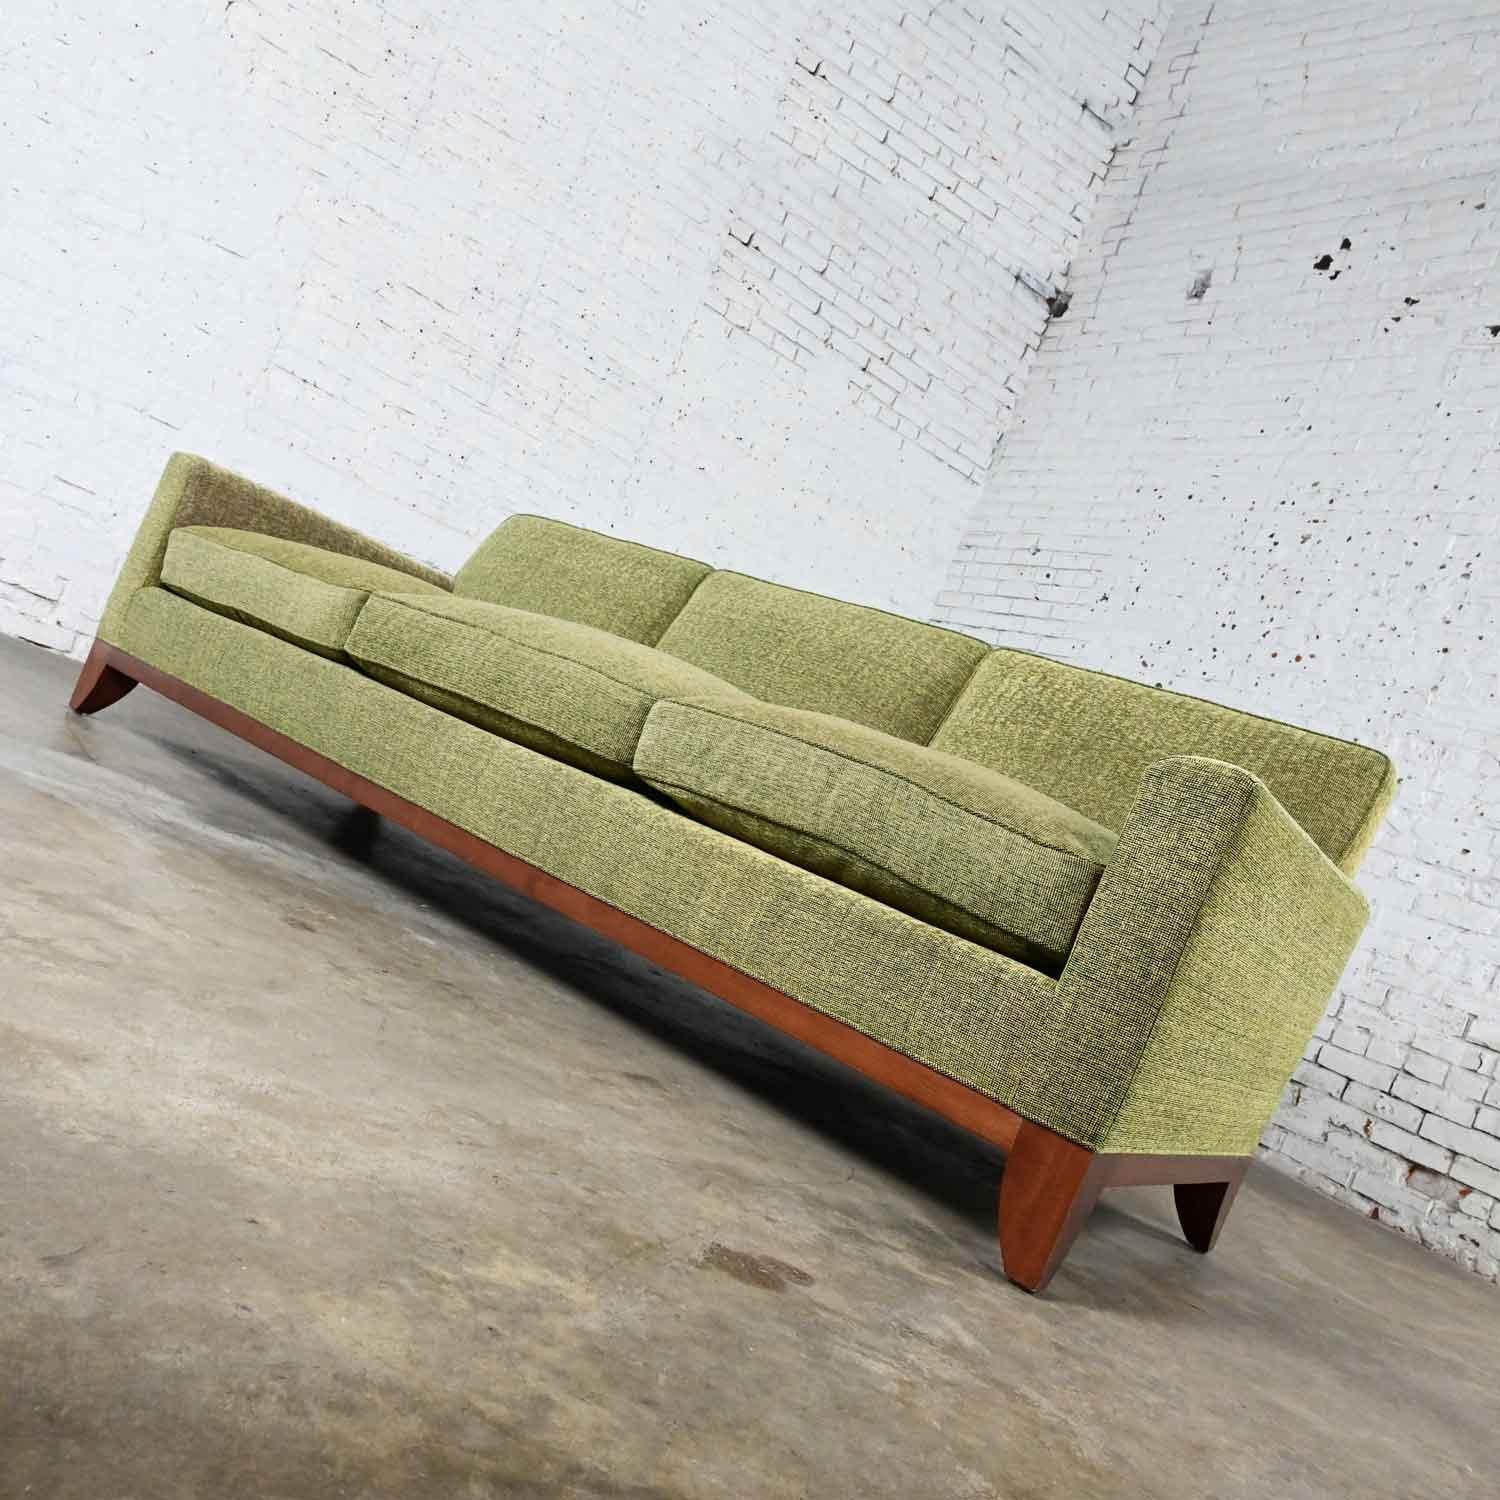 Stunning vintage Modern custom made Lawson style large scale tight back sofa khaki with olive green overtones. Comprised of upholstered frames, feather down wrapped foam loose zippered seat cushions, square tapered legs, and light mahogany finished